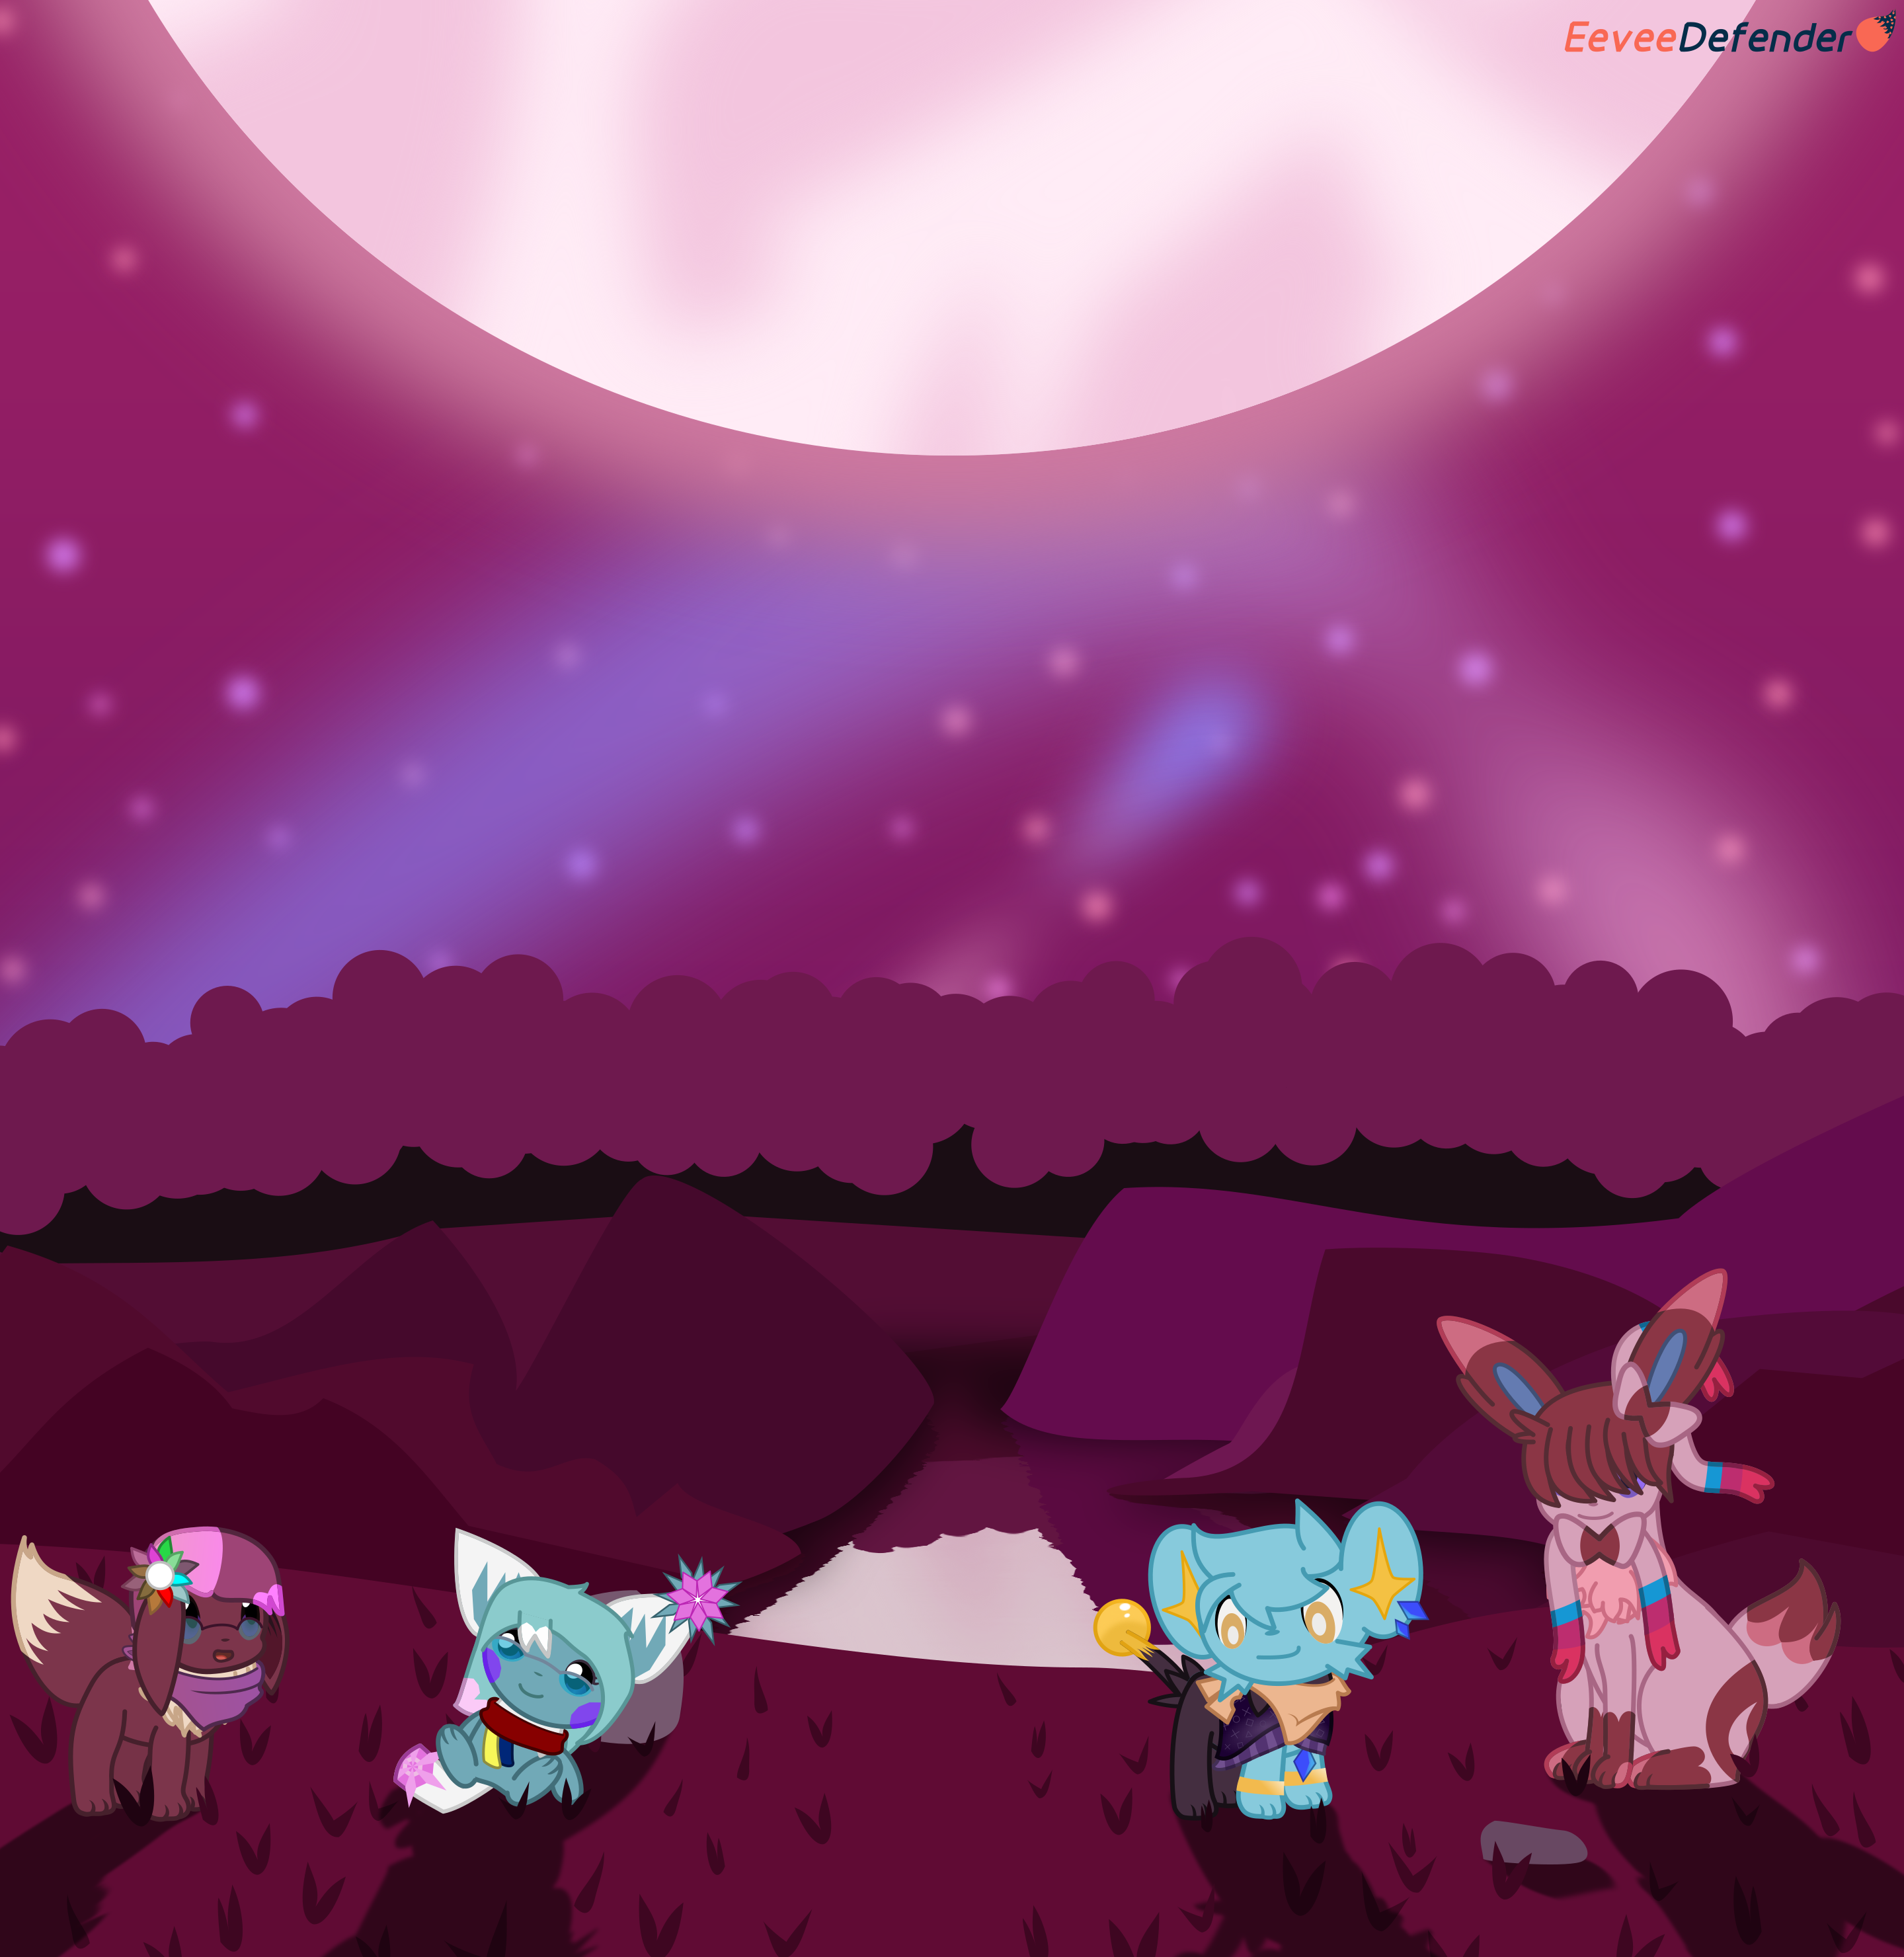 An eevee, pichu, shinx, and sylveon all look up at the moon, all standing on a purpleish hill.